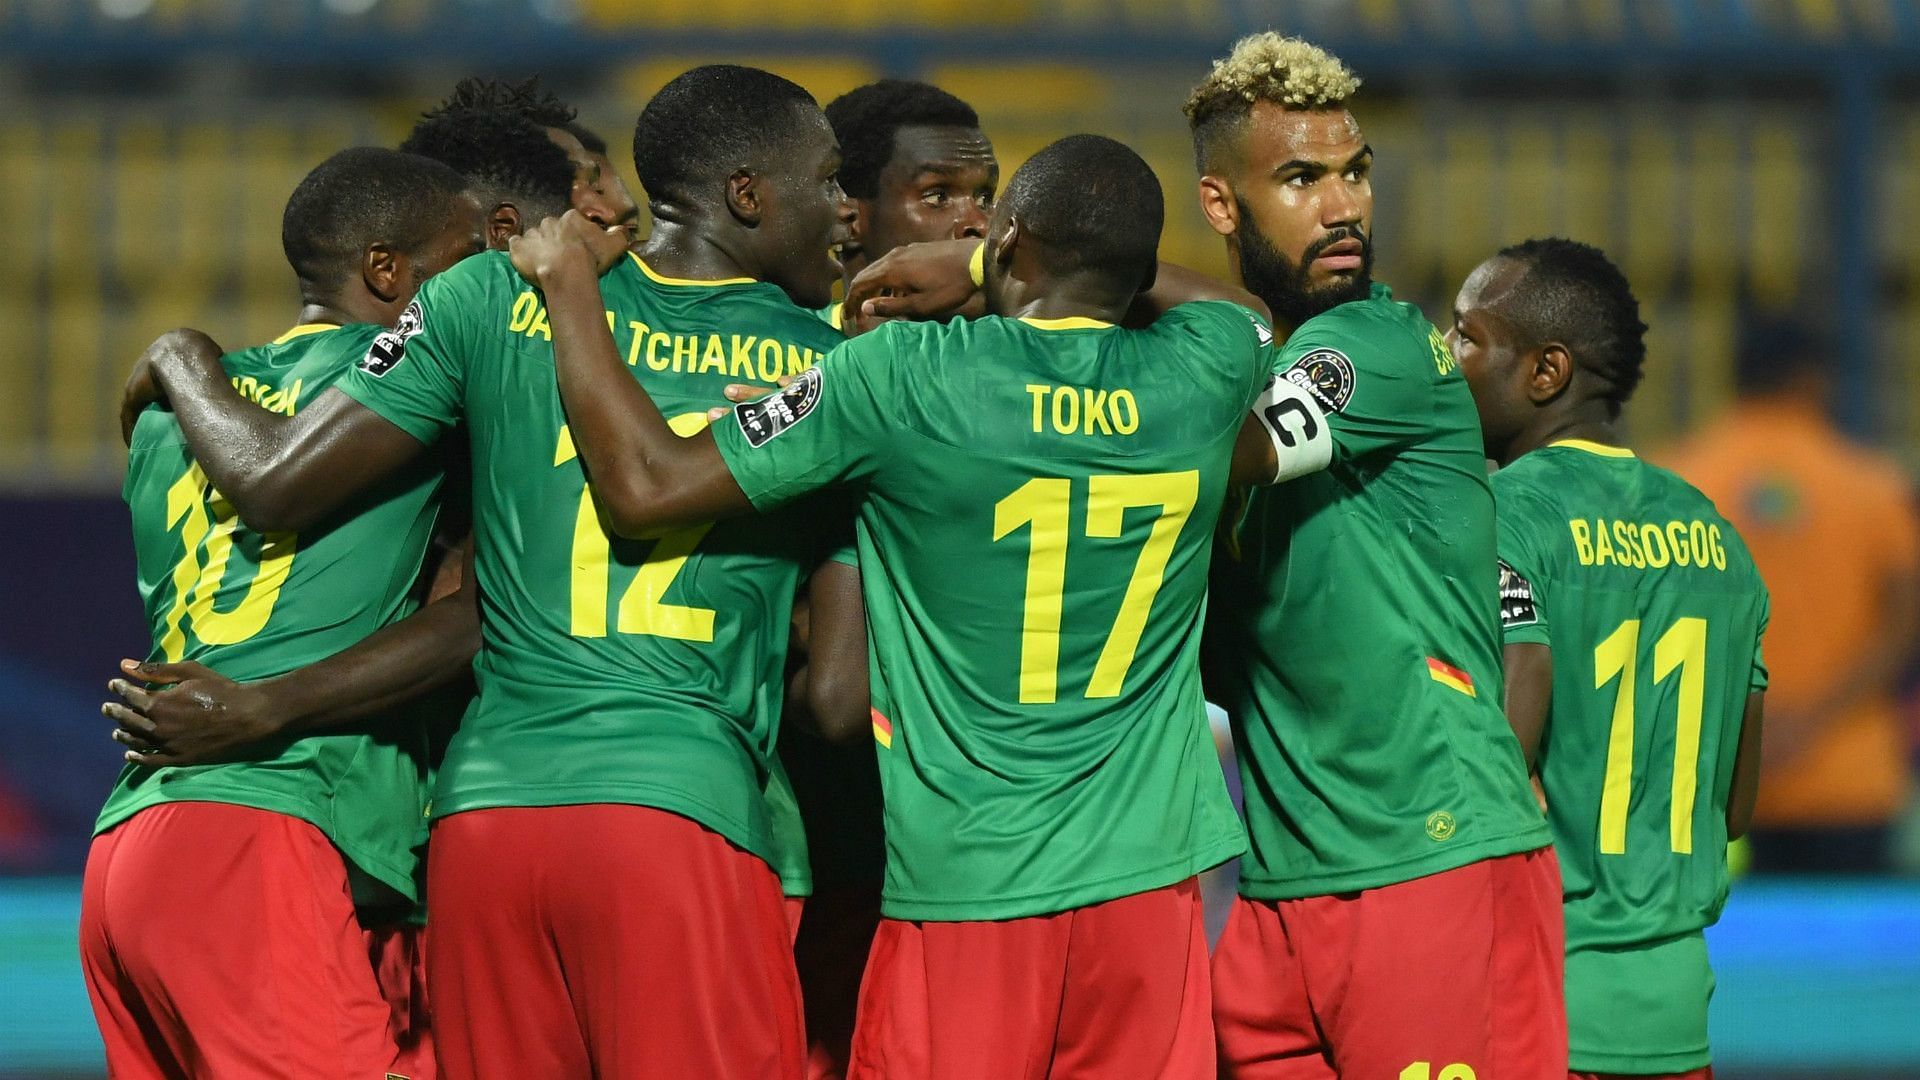 Cape Verde will face Cameroon on Monday - Africa Cup of Nations